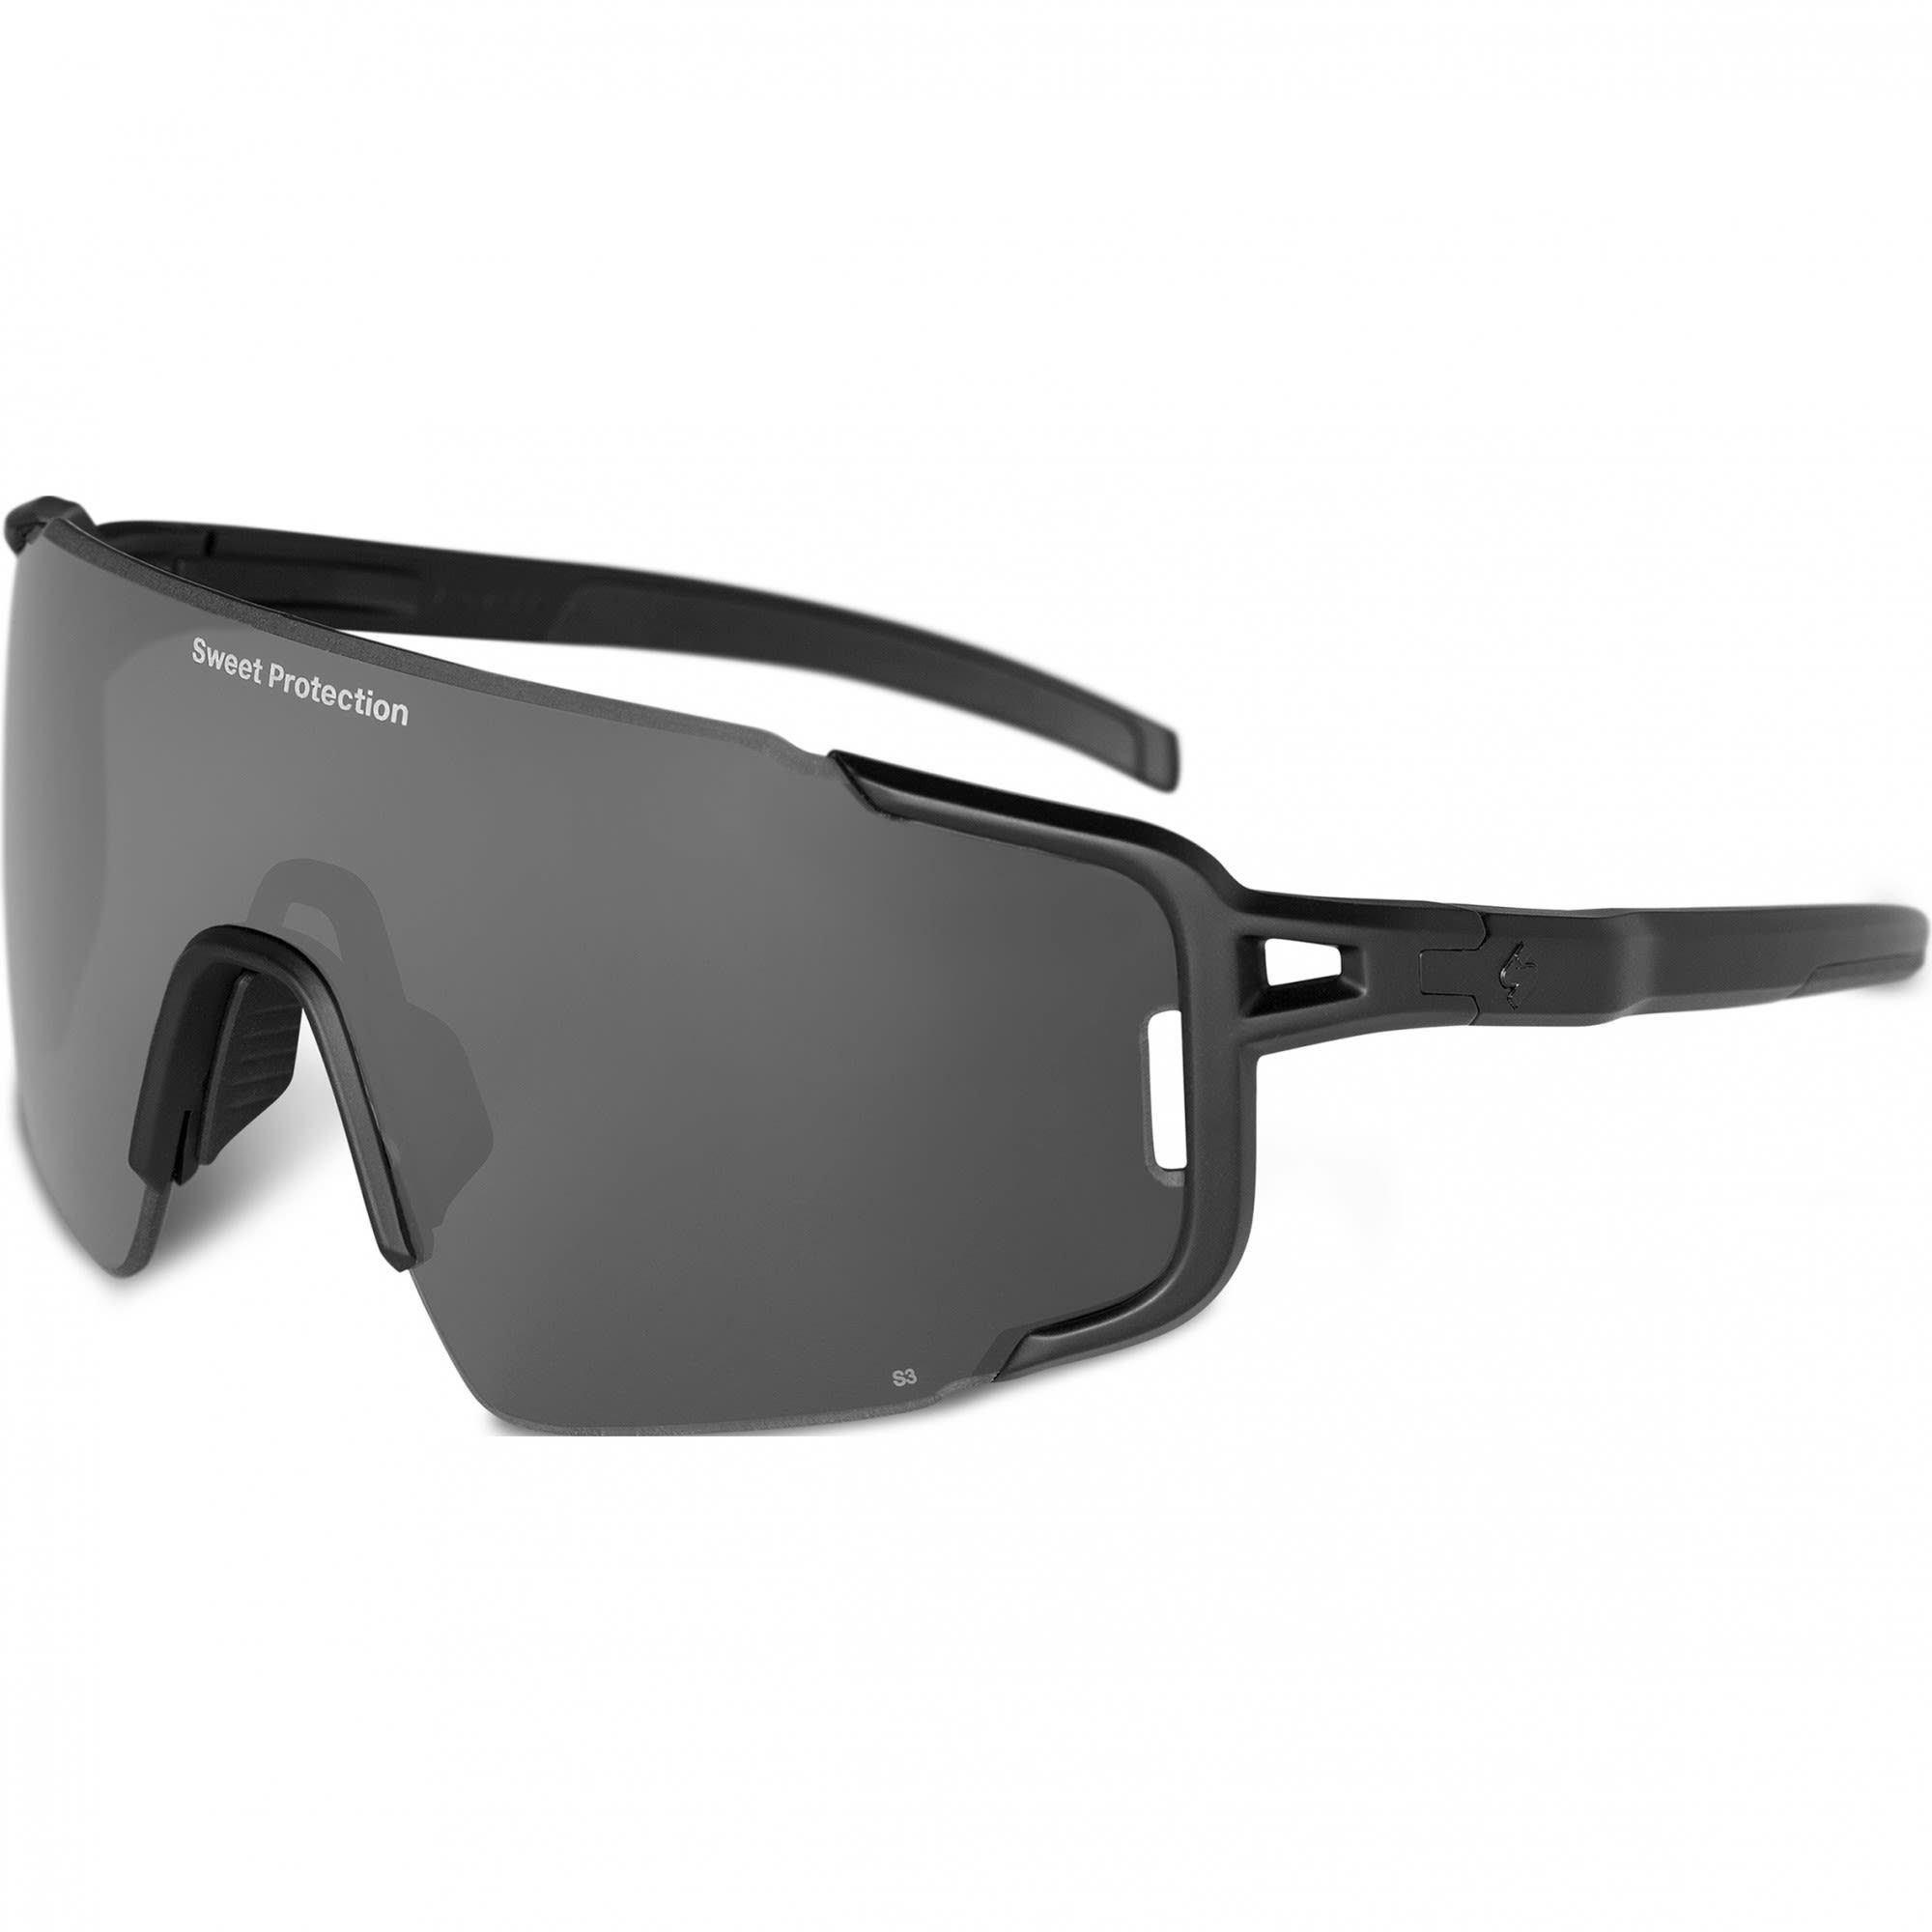 Sweet Protection Fahrradbrille Sweet Protection Polarized Max Accessoires Ronin